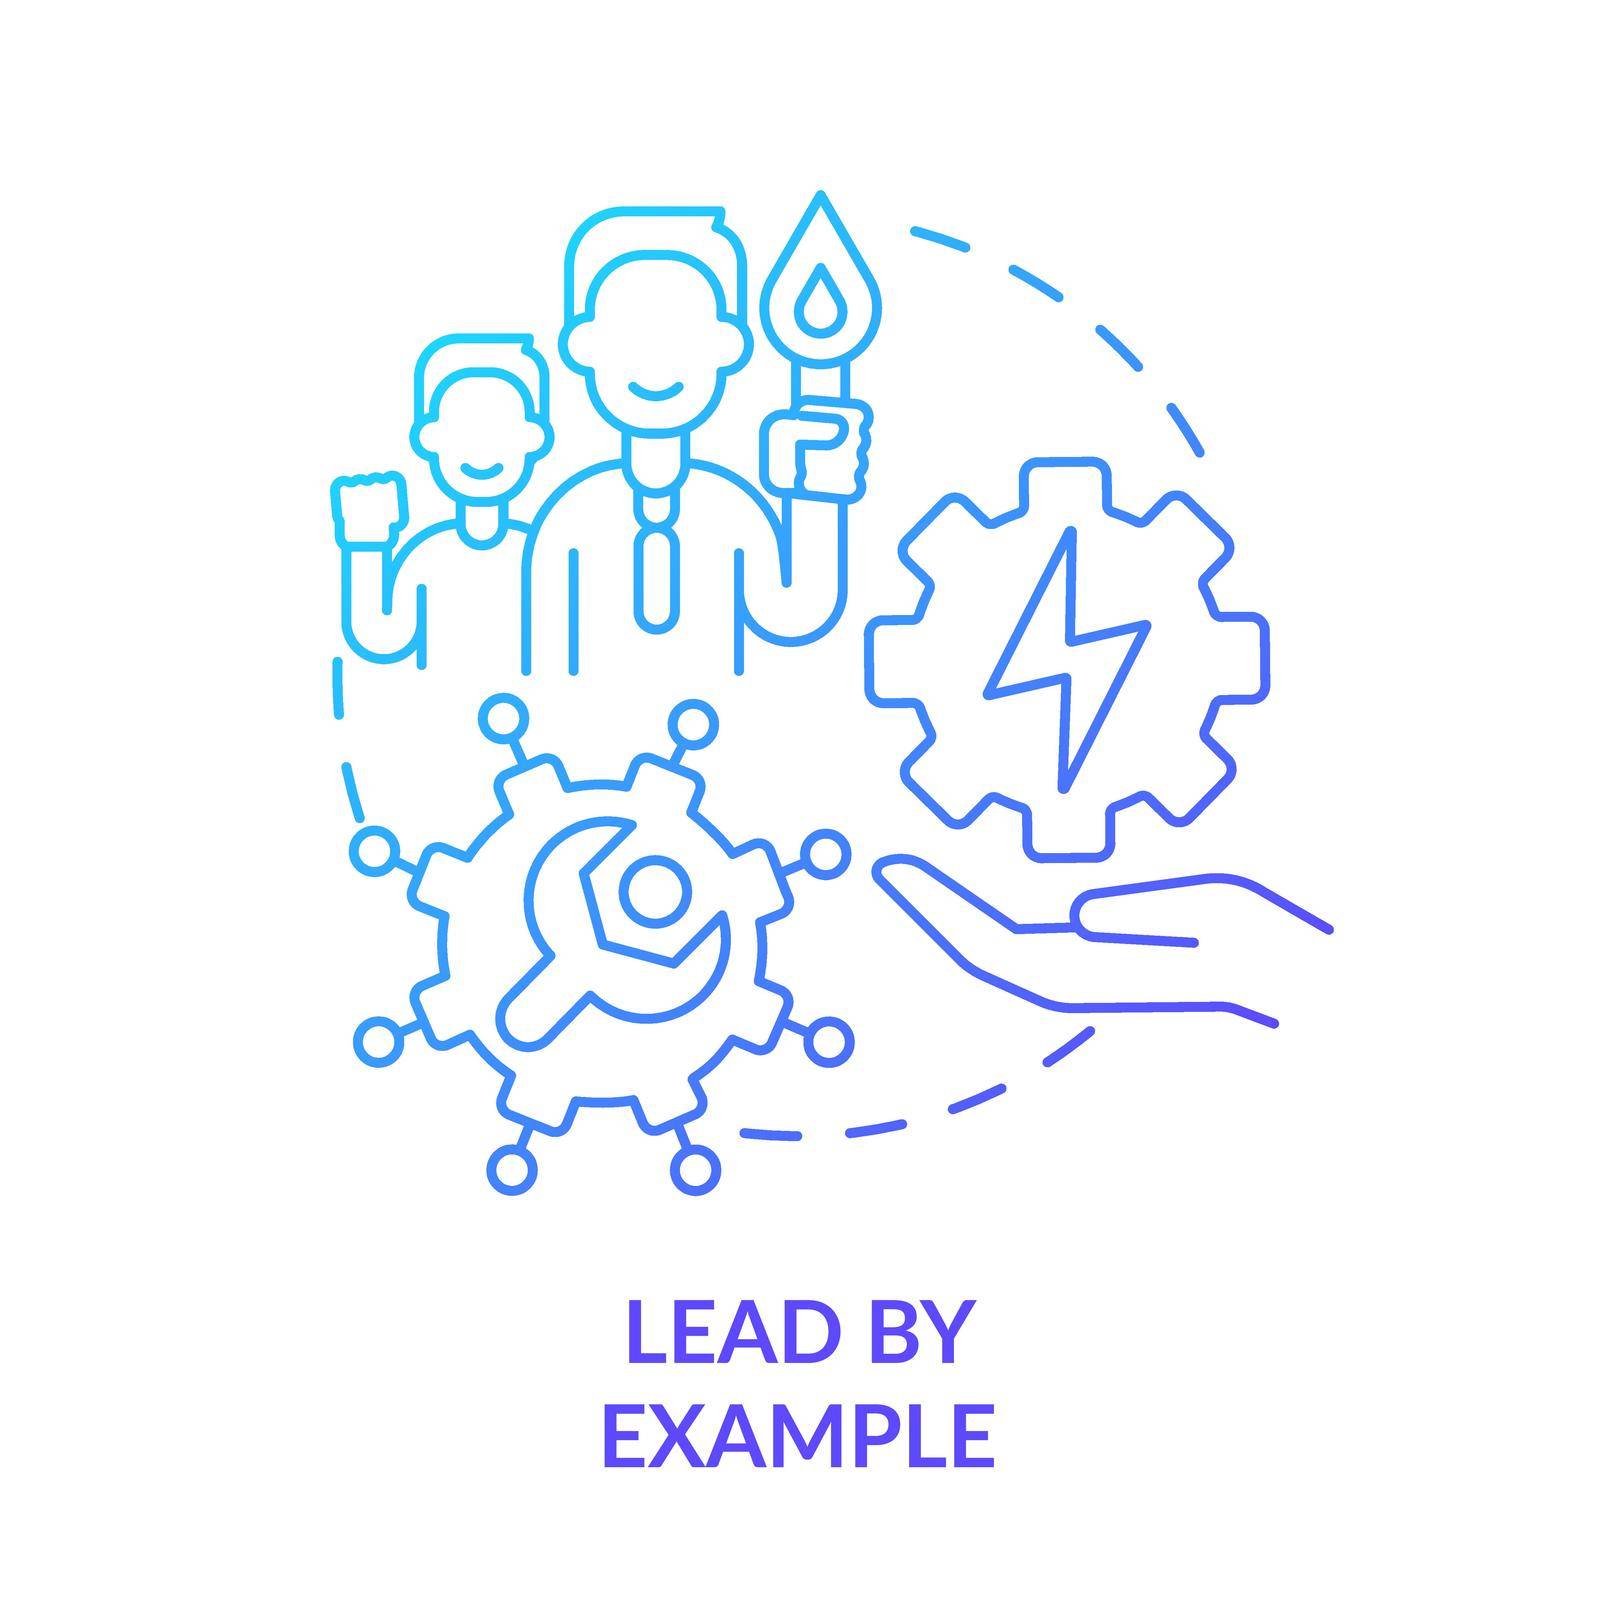 Lead by example blue gradient concept icon by bsd studio